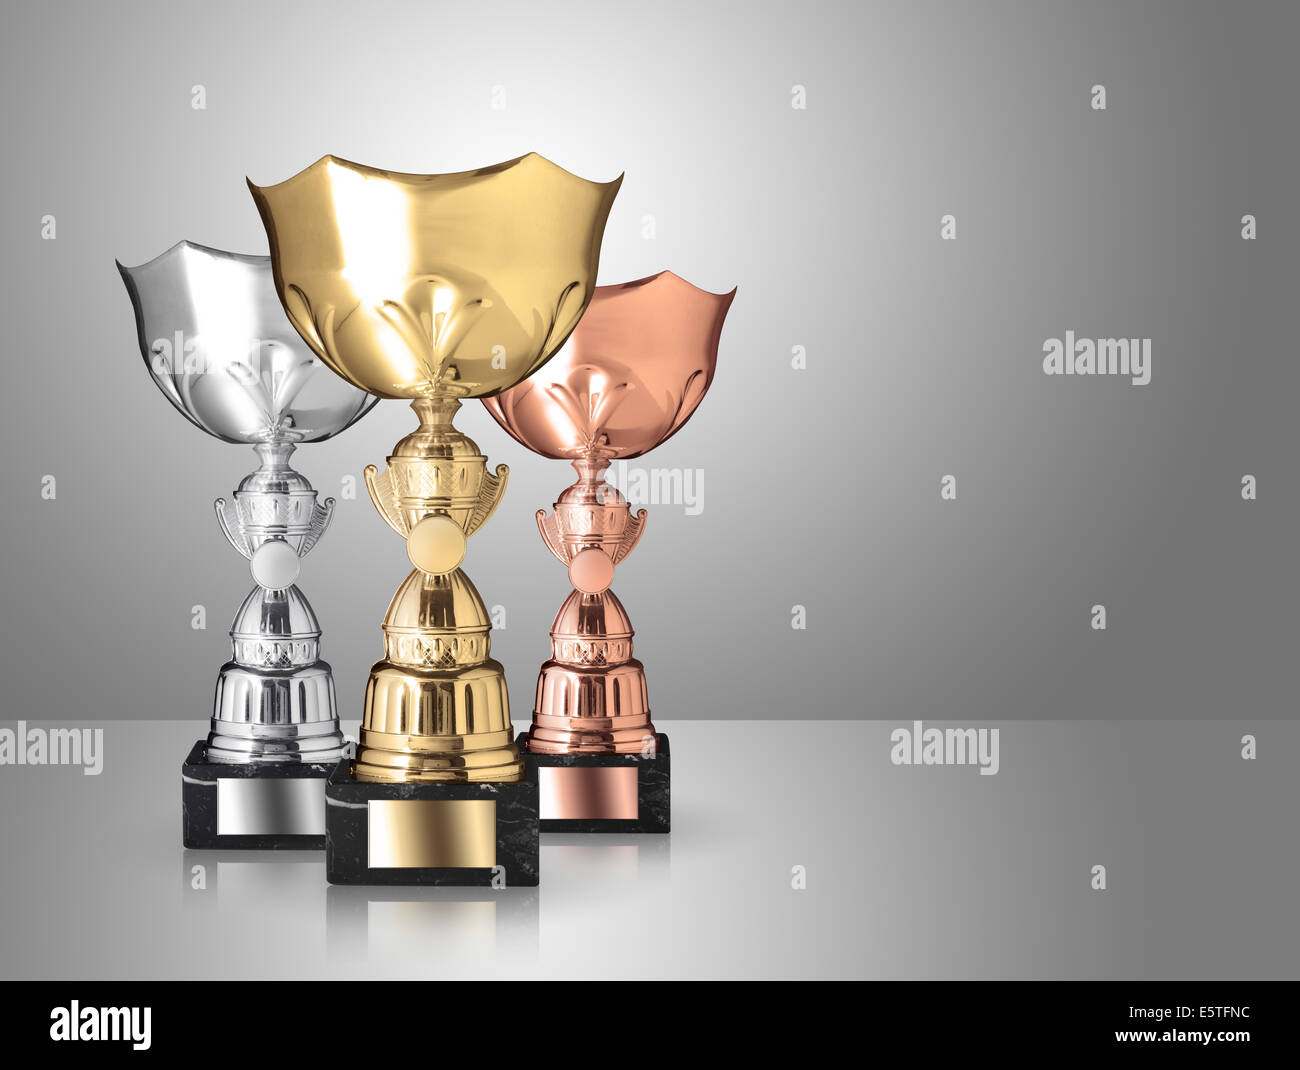 golden, silver and bronze trophies on gray background Stock Photo